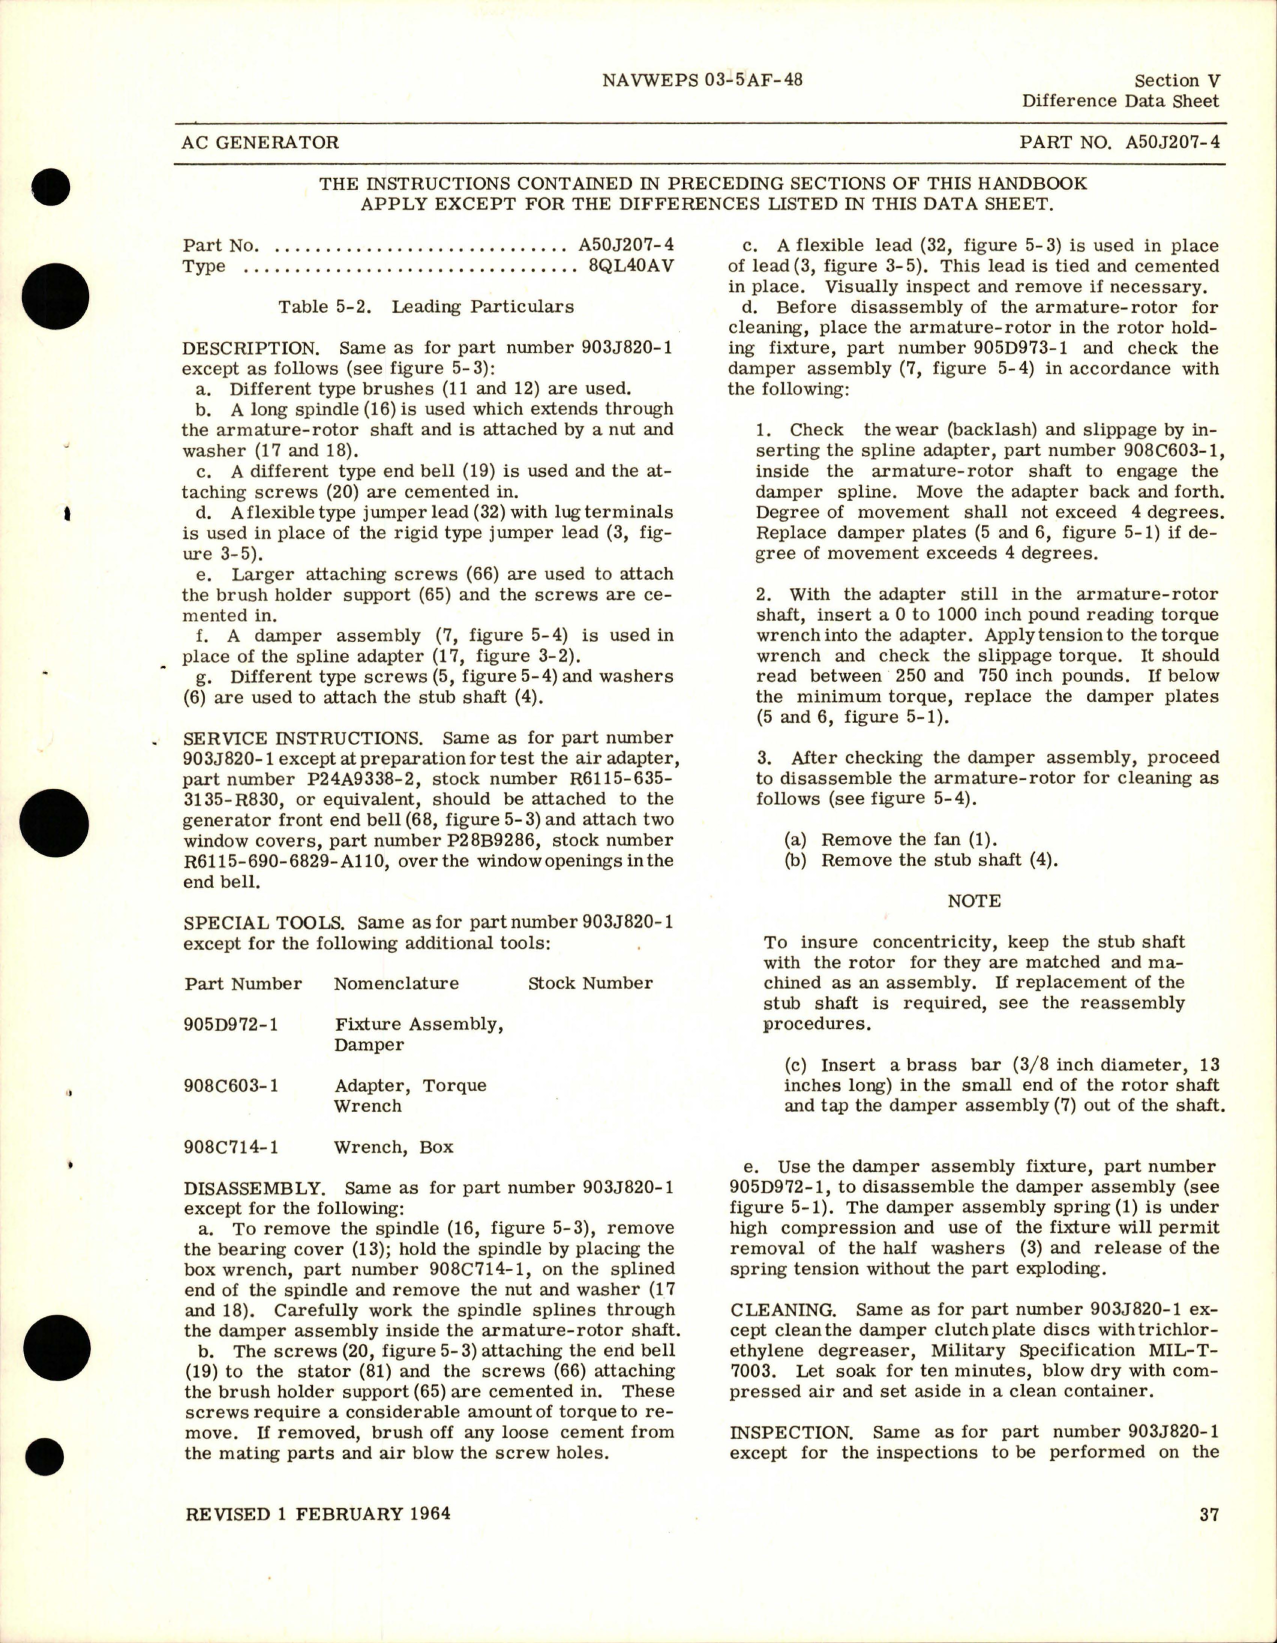 Sample page 5 from AirCorps Library document: Operation, Service and Overhaul Instructions for AC Generator - Parts 903J820-1, A50J207-2, and A50J207-4